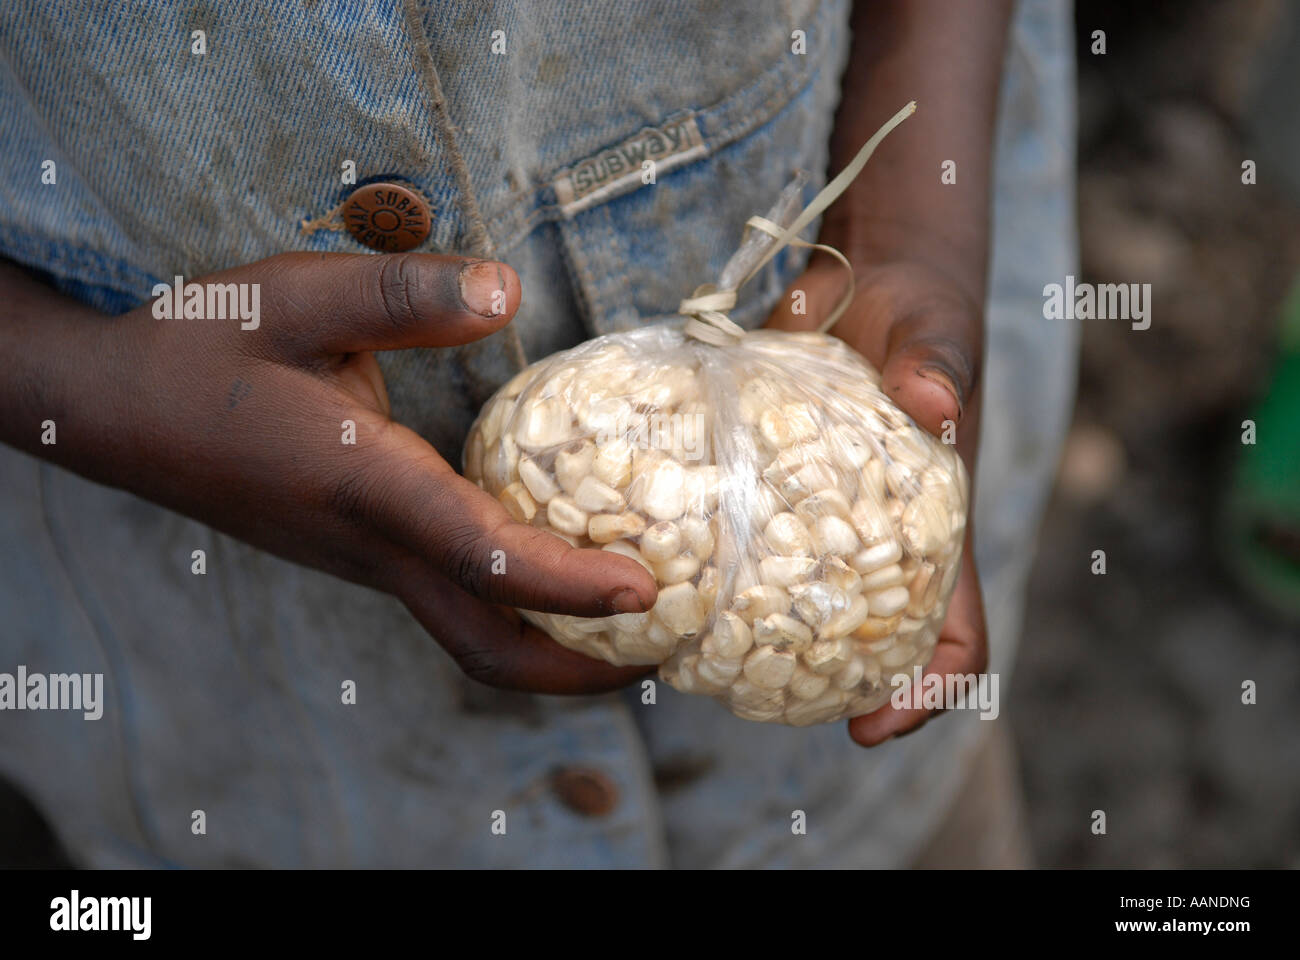 Young boy holds bundle of grains in North Kivu province, DR Congo Africa Stock Photo